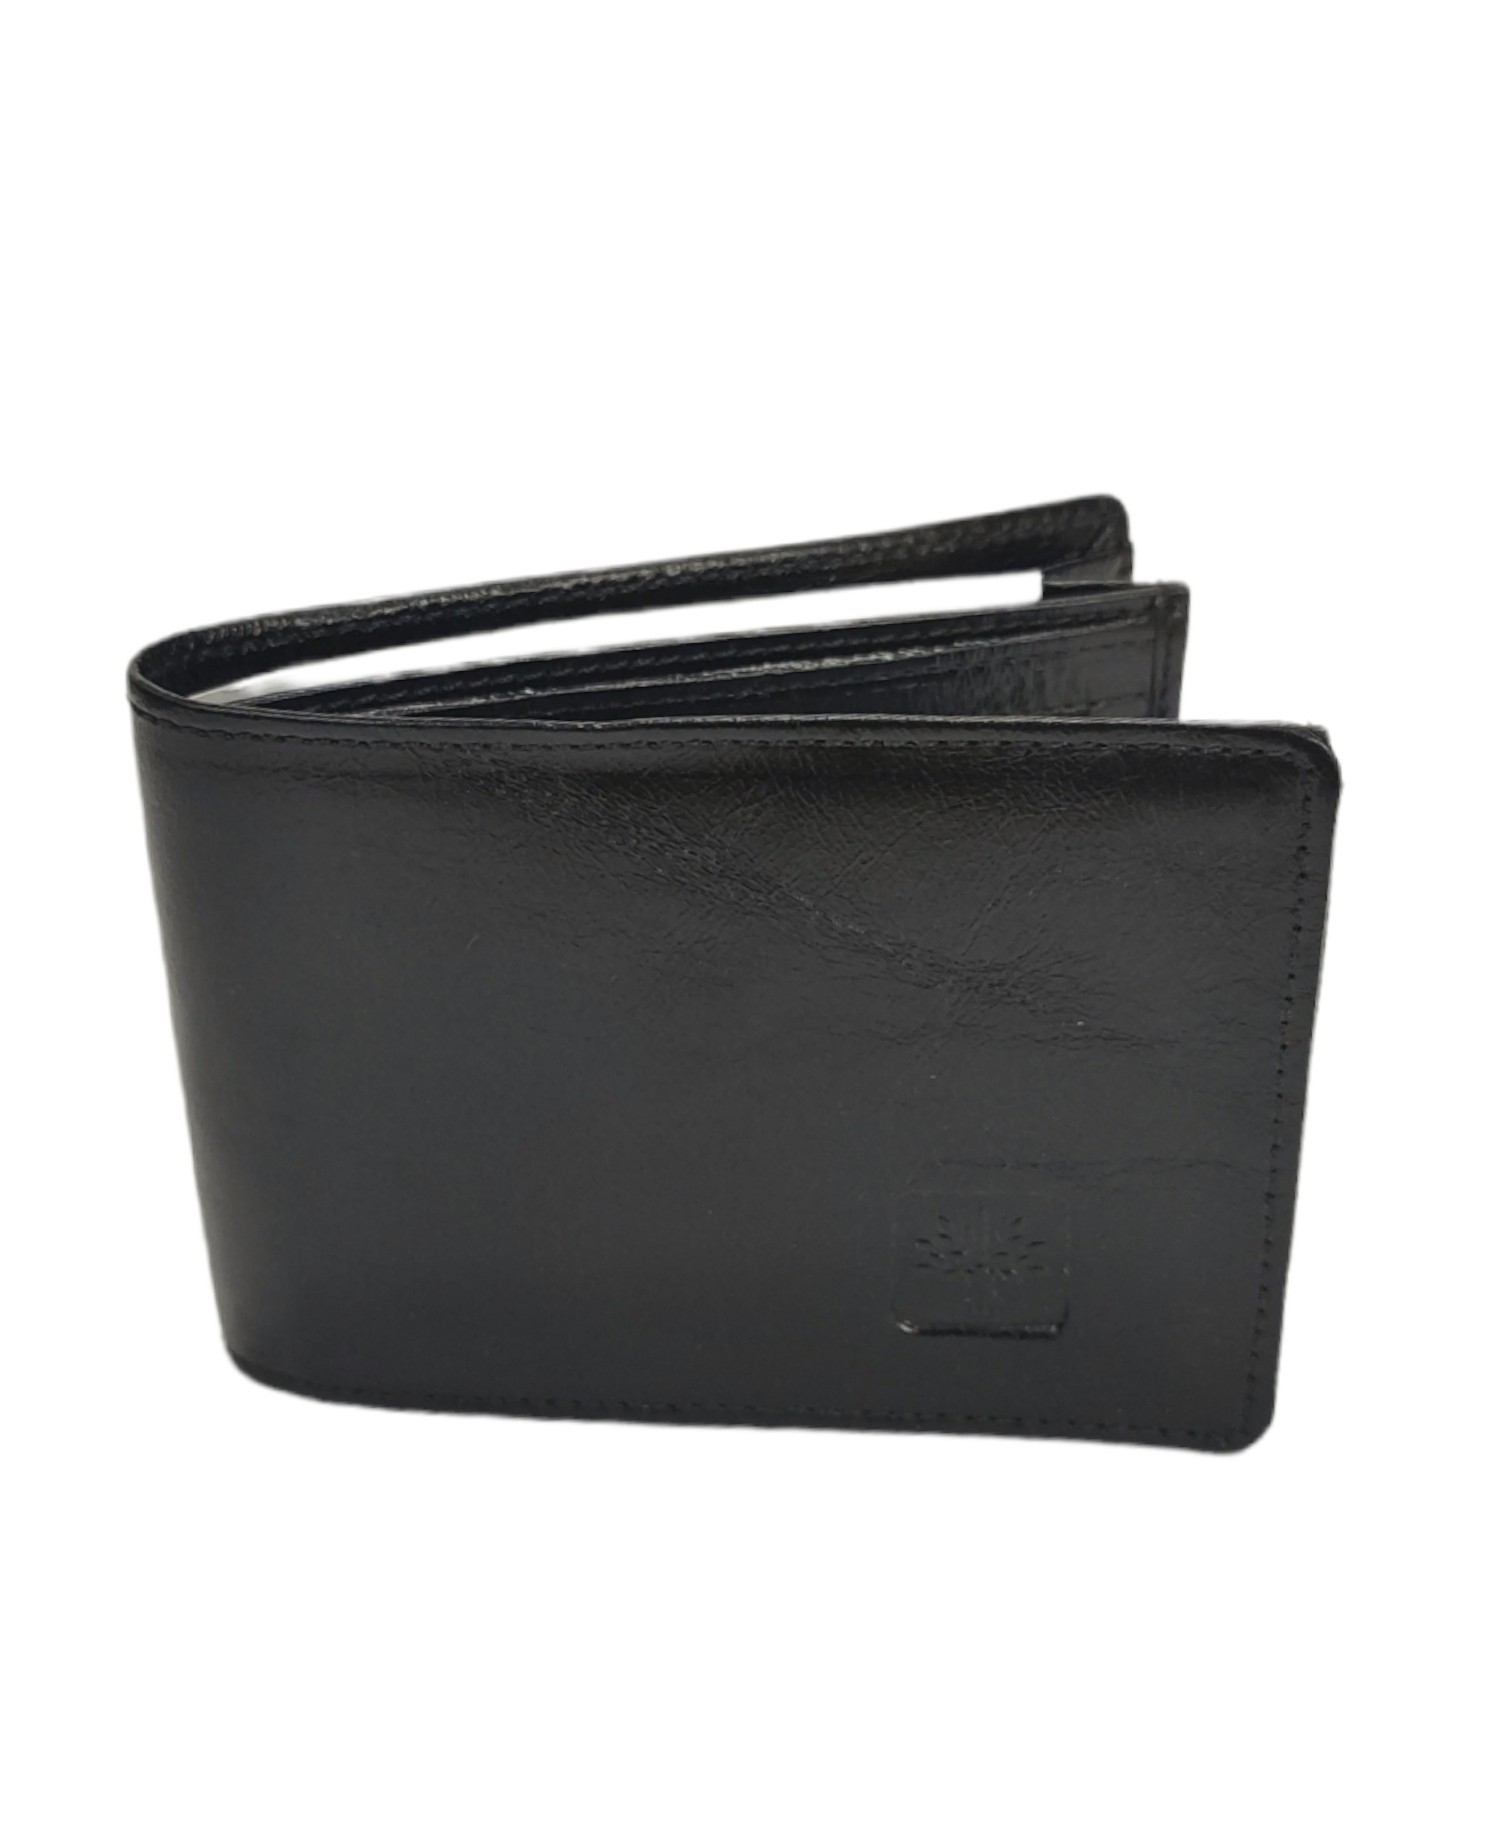 Buy Woodland Woodland Men Leather Two Fold Wallet at Redfynd